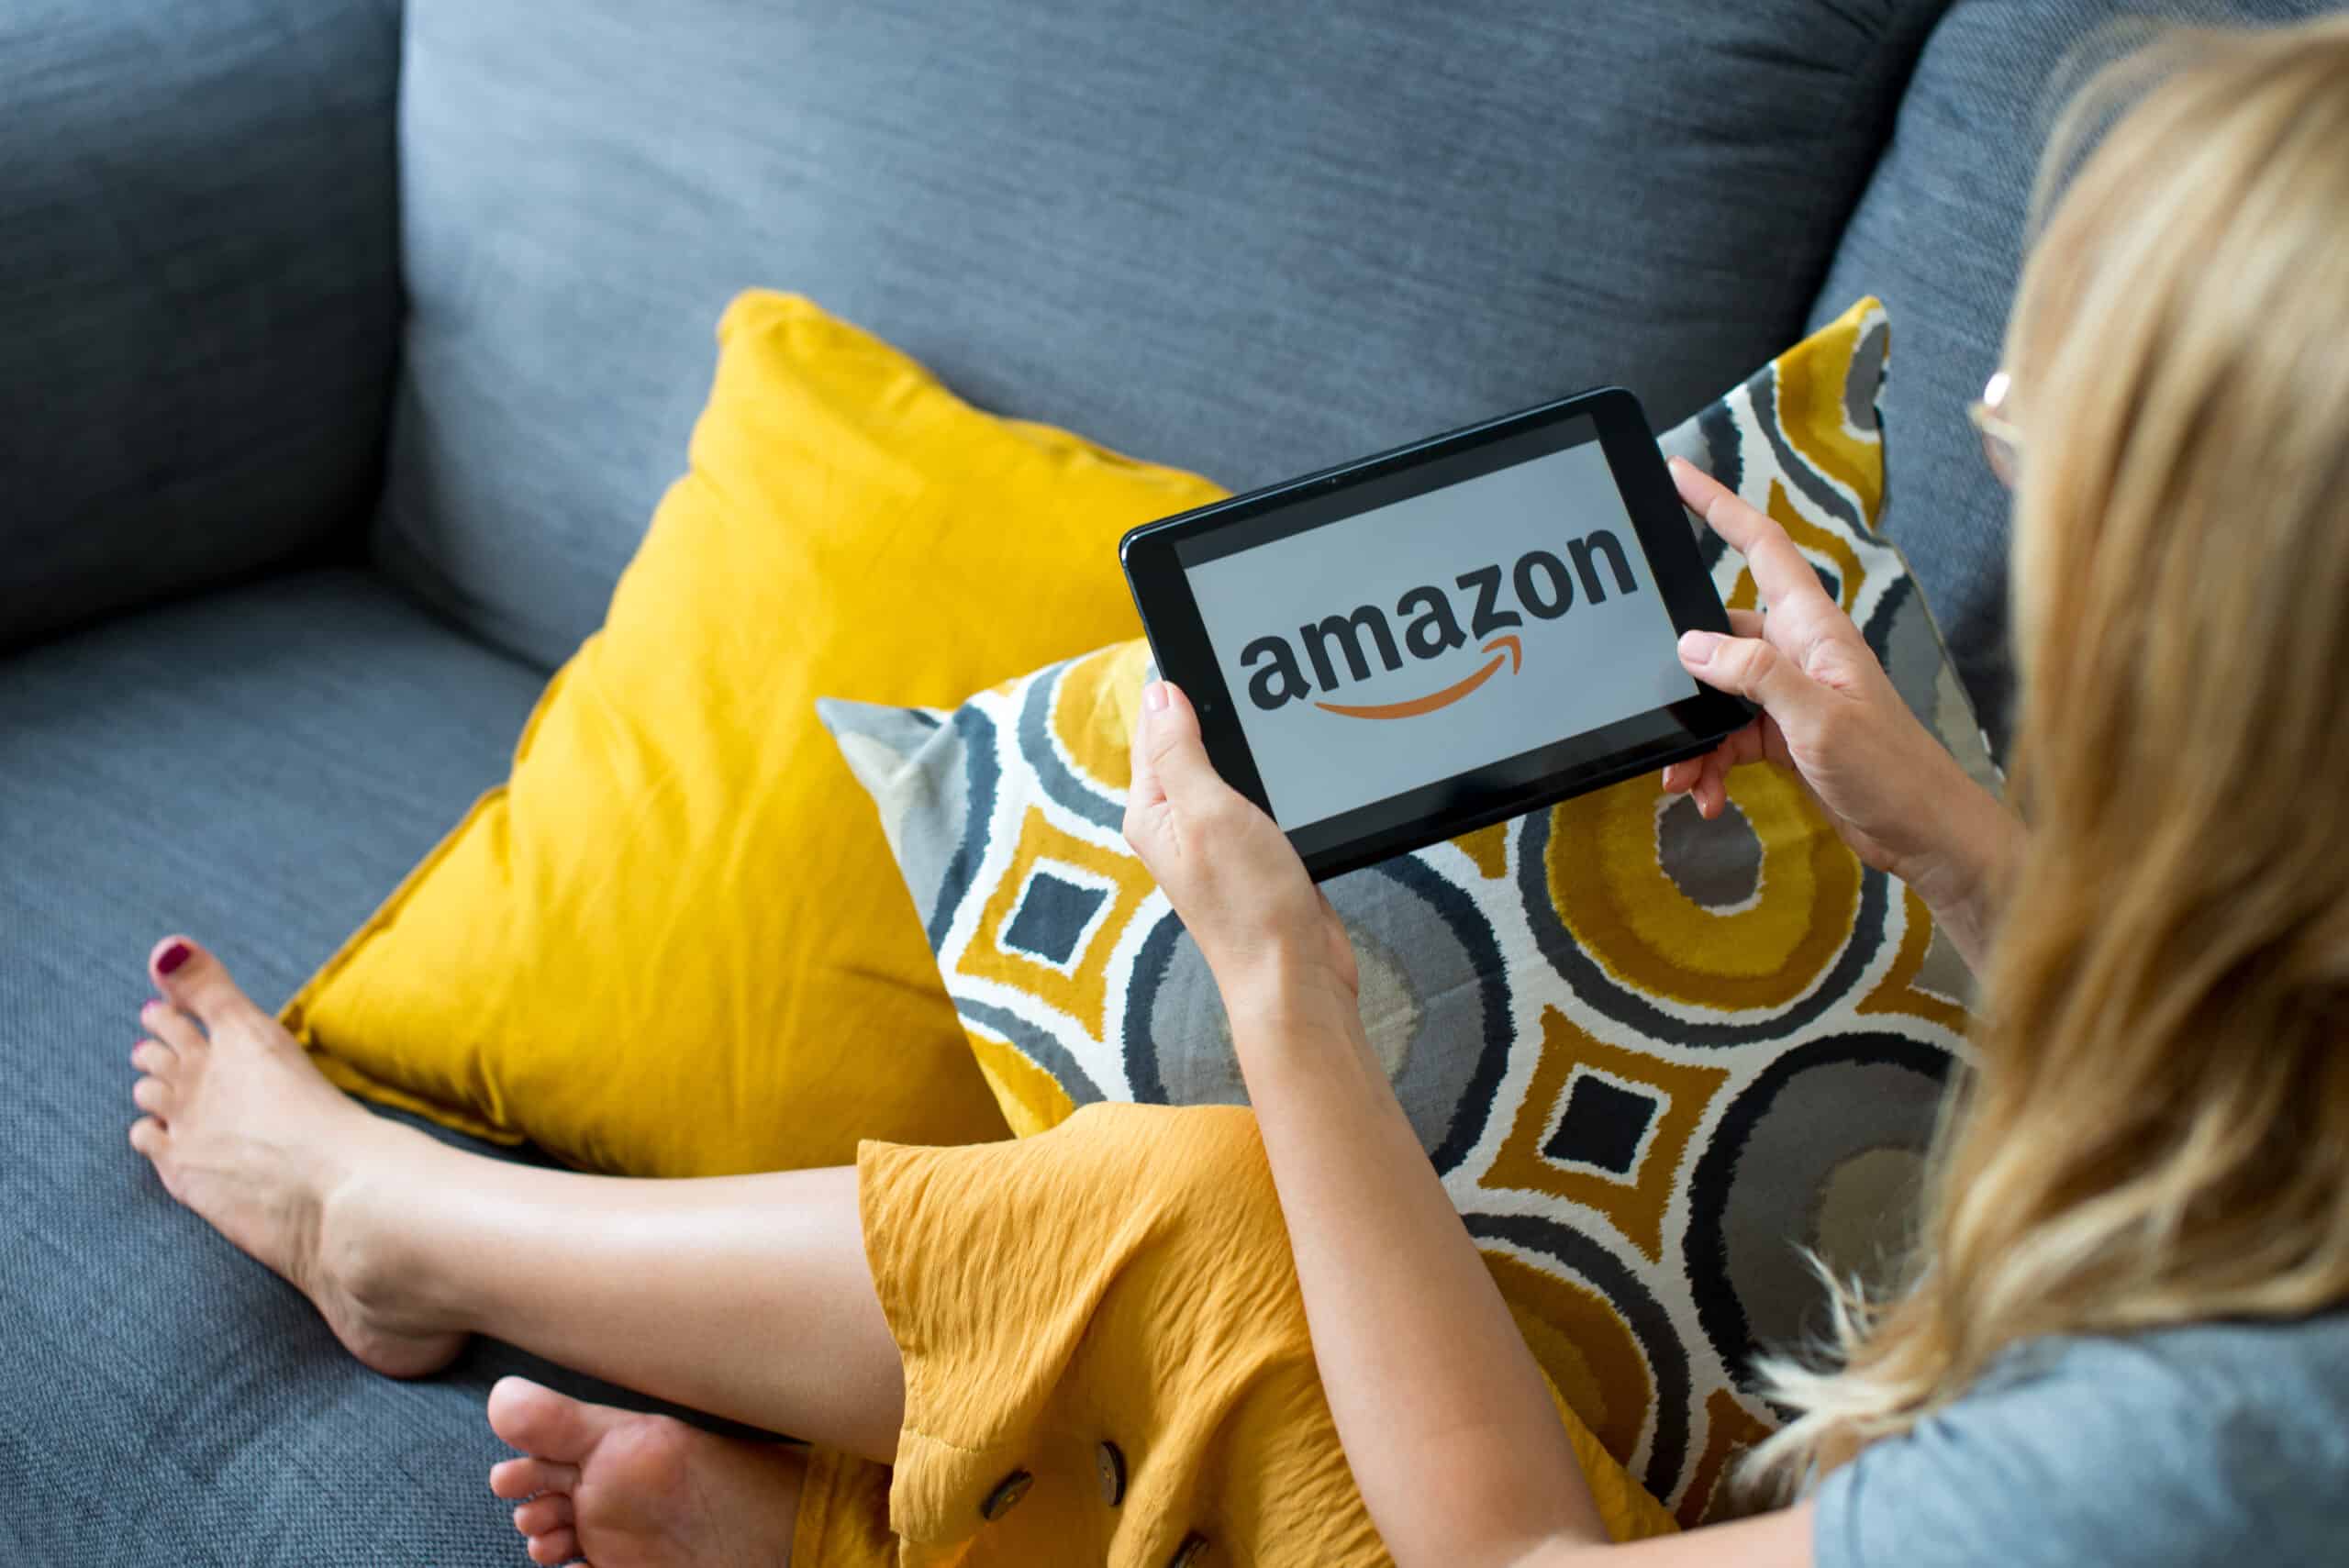 Woman looking up Amazon Prime perks on a tablet.